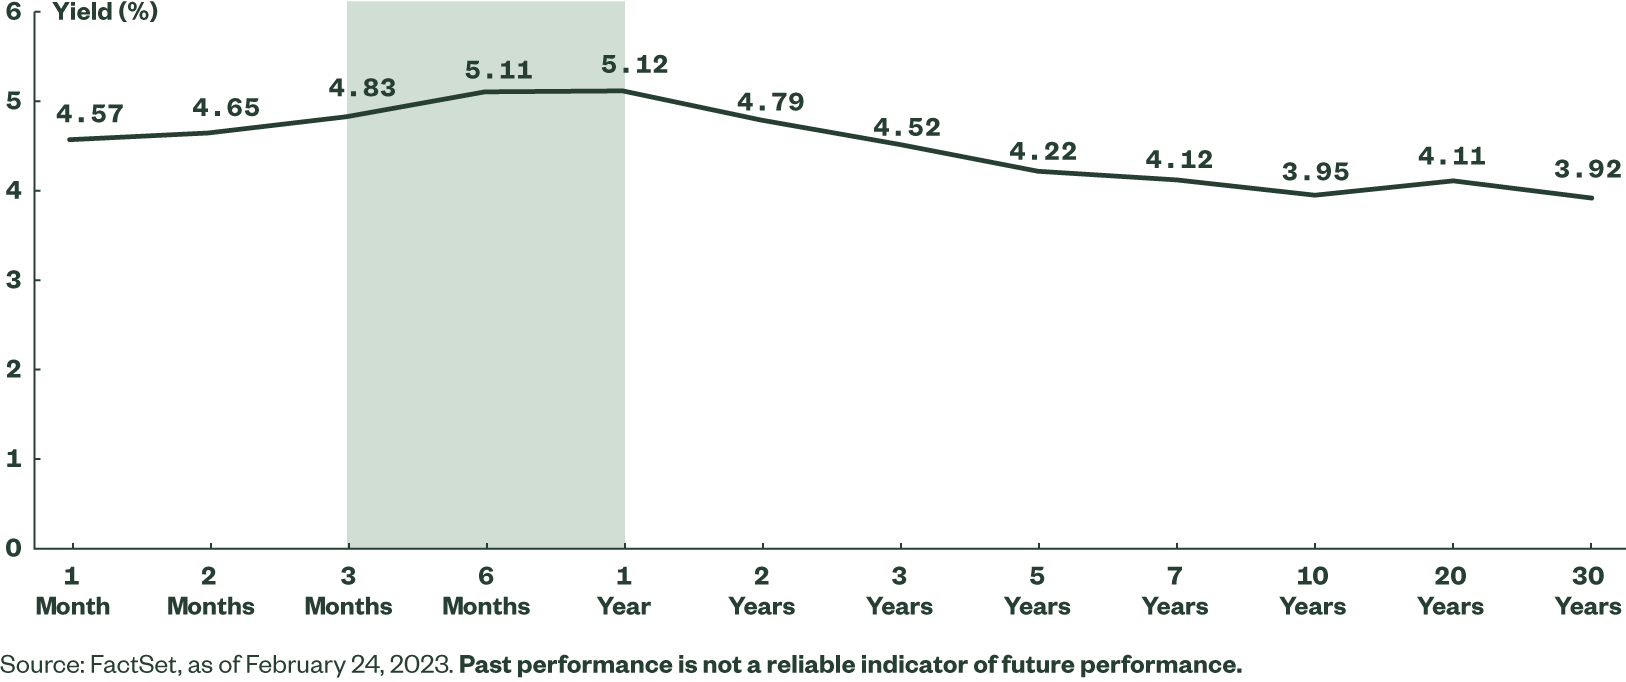 A line chart showing the Treasury yield curve from 1 month to 30 years, as of February 24, 2023.